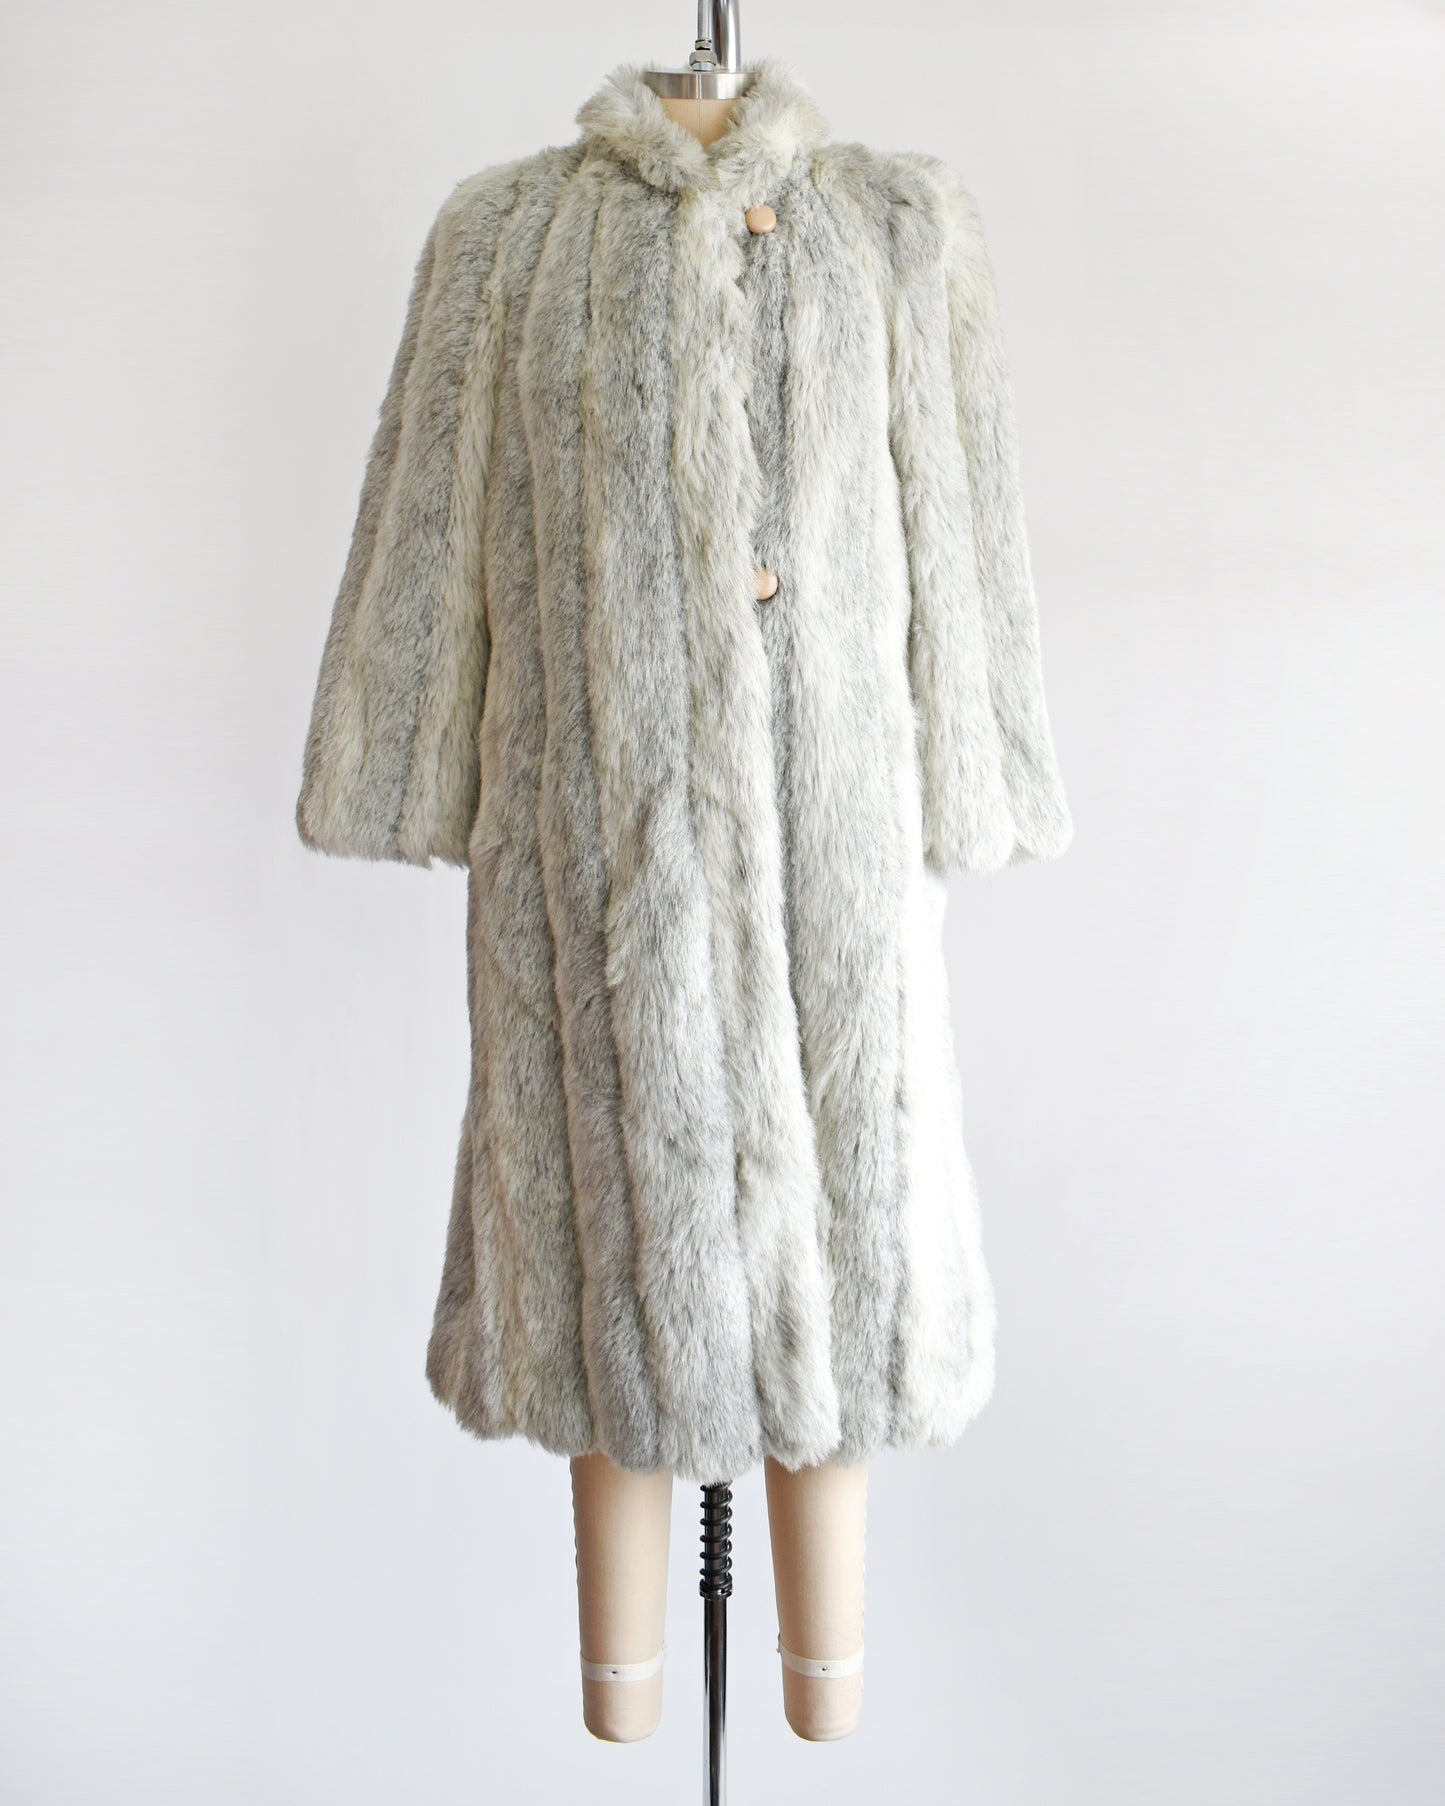 A vintage 1980s  cream colored faux fur coat with light and dark gray stripes. 